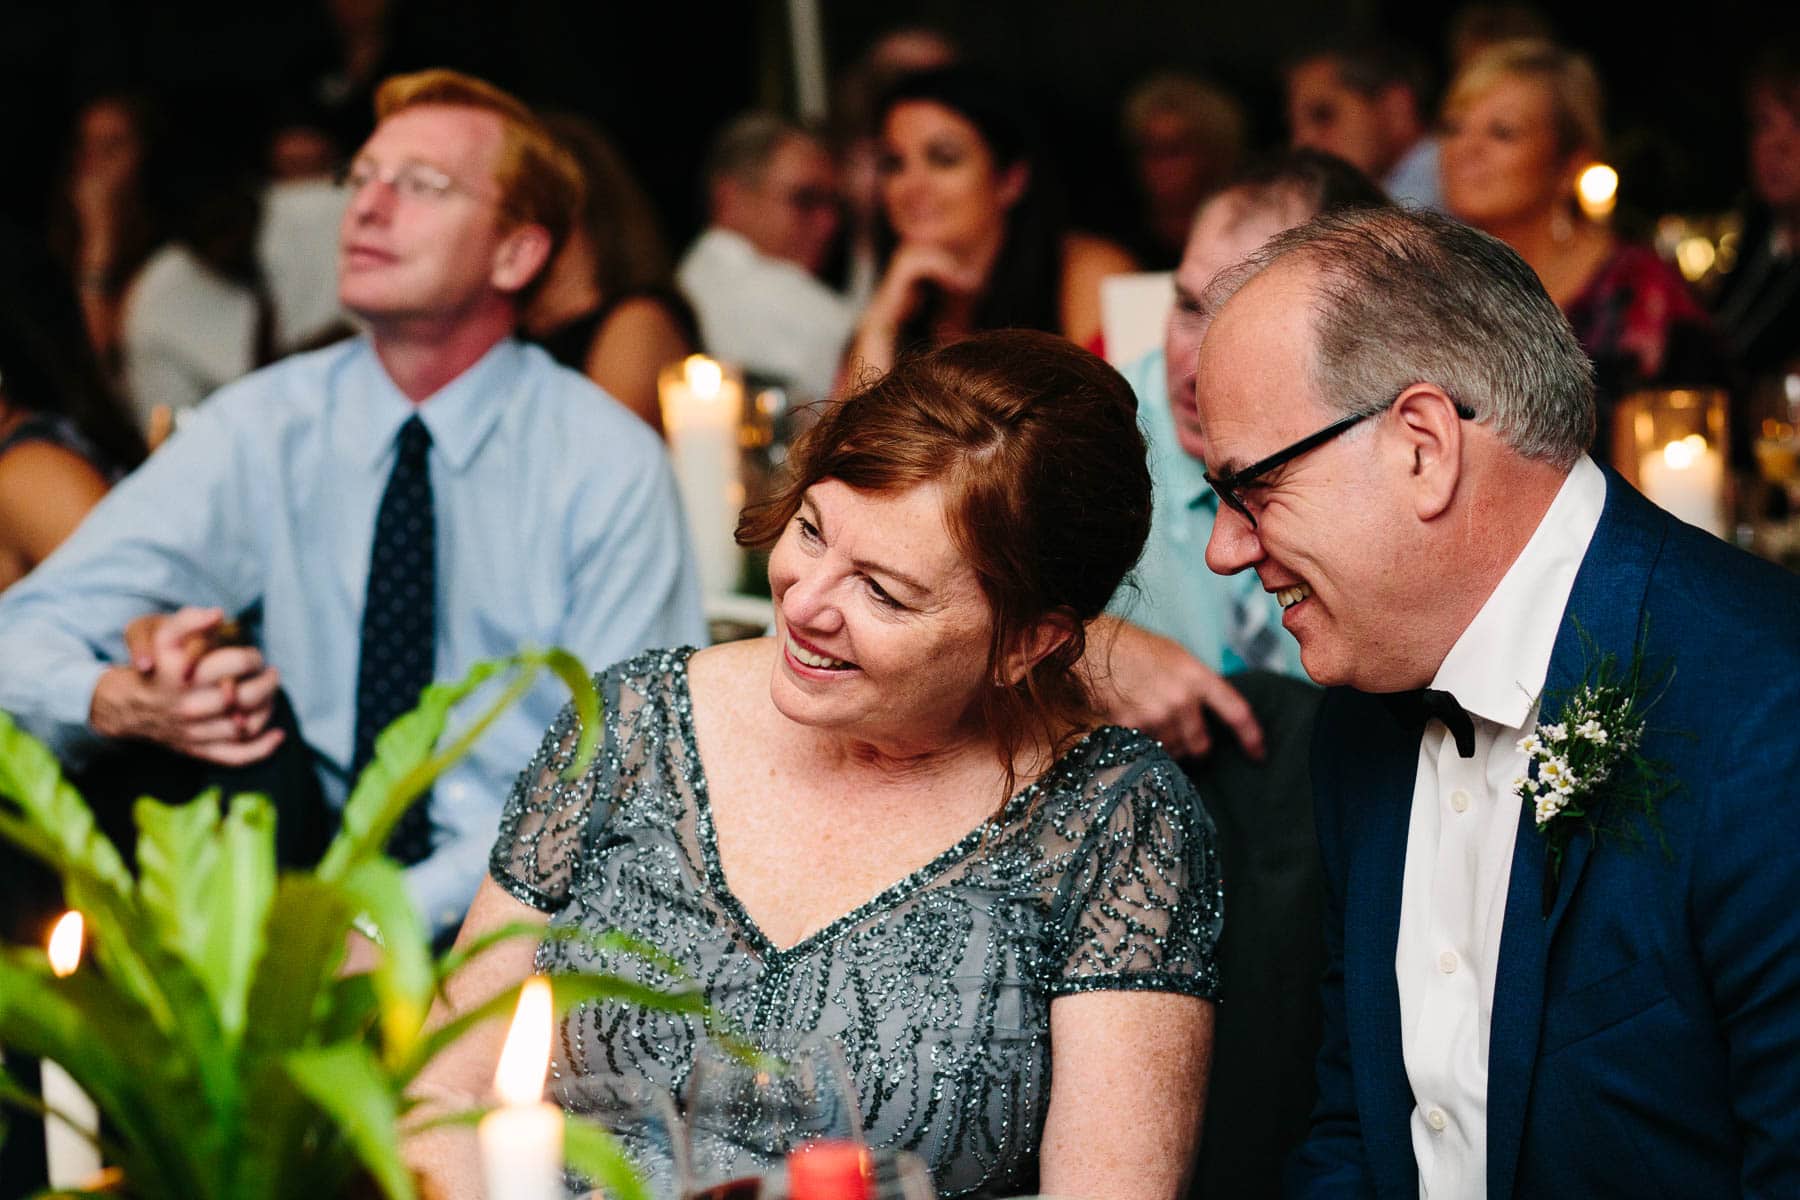 laughter during toasts | Kelly Benvenuto Photography